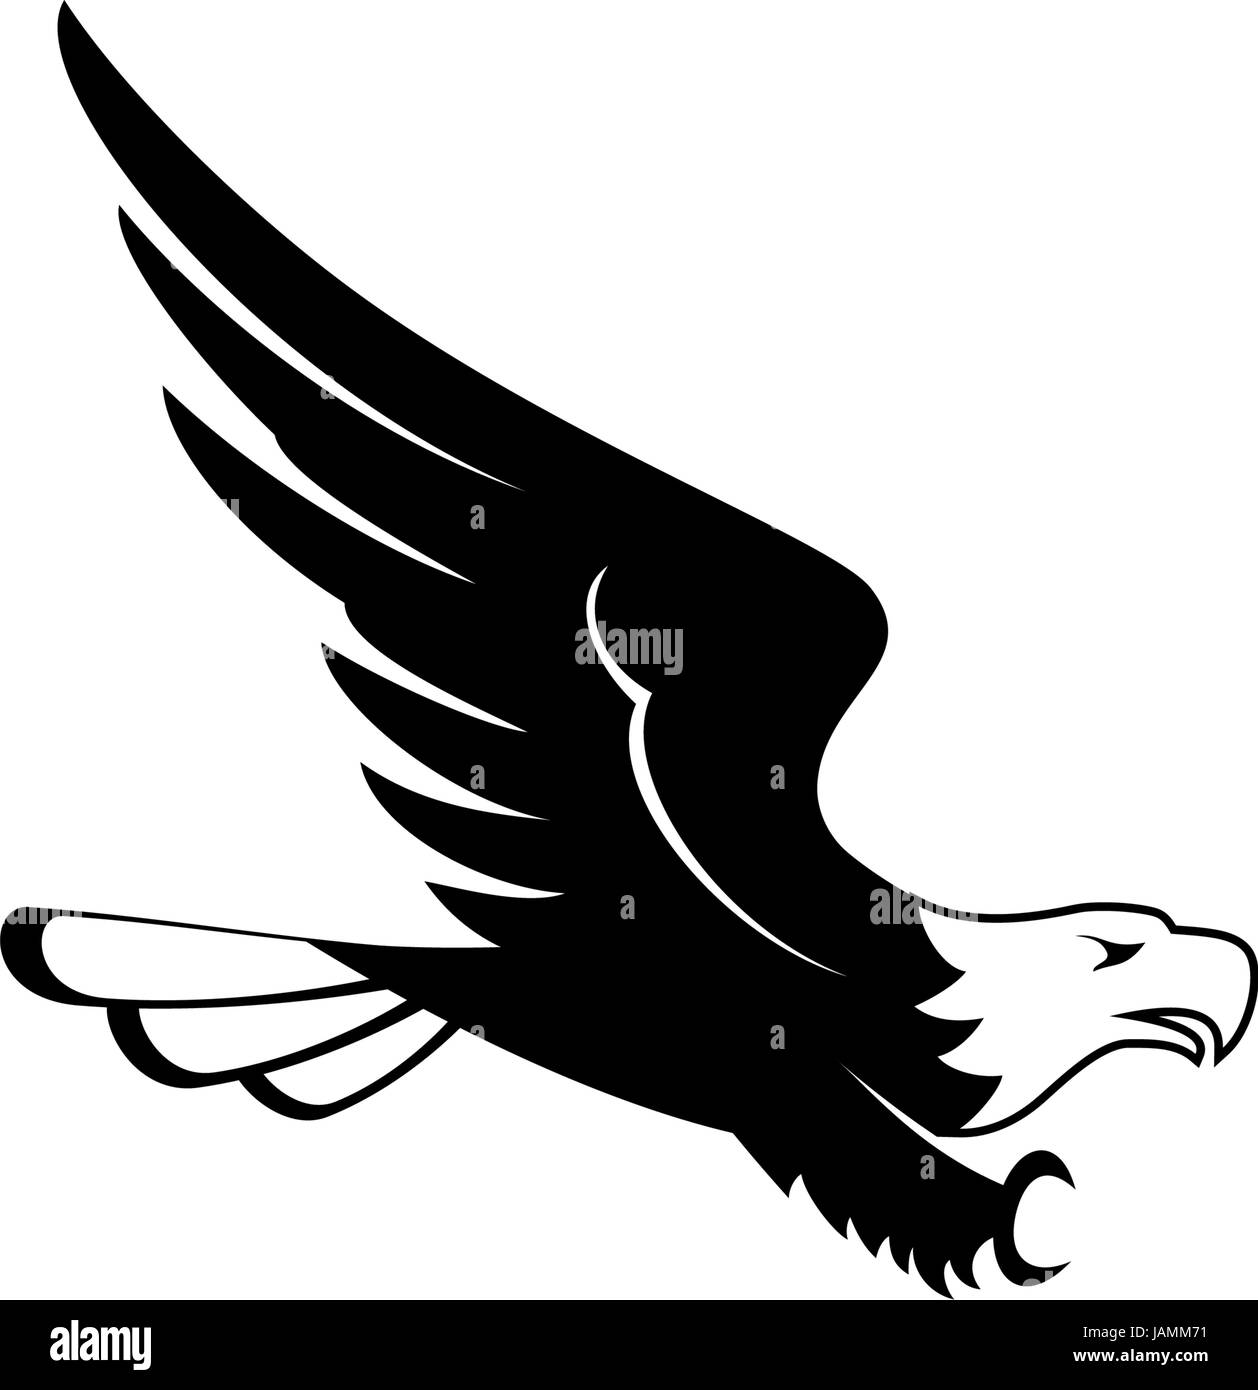 Flying Eagle Black and White Stock Photos & Images - Alamy